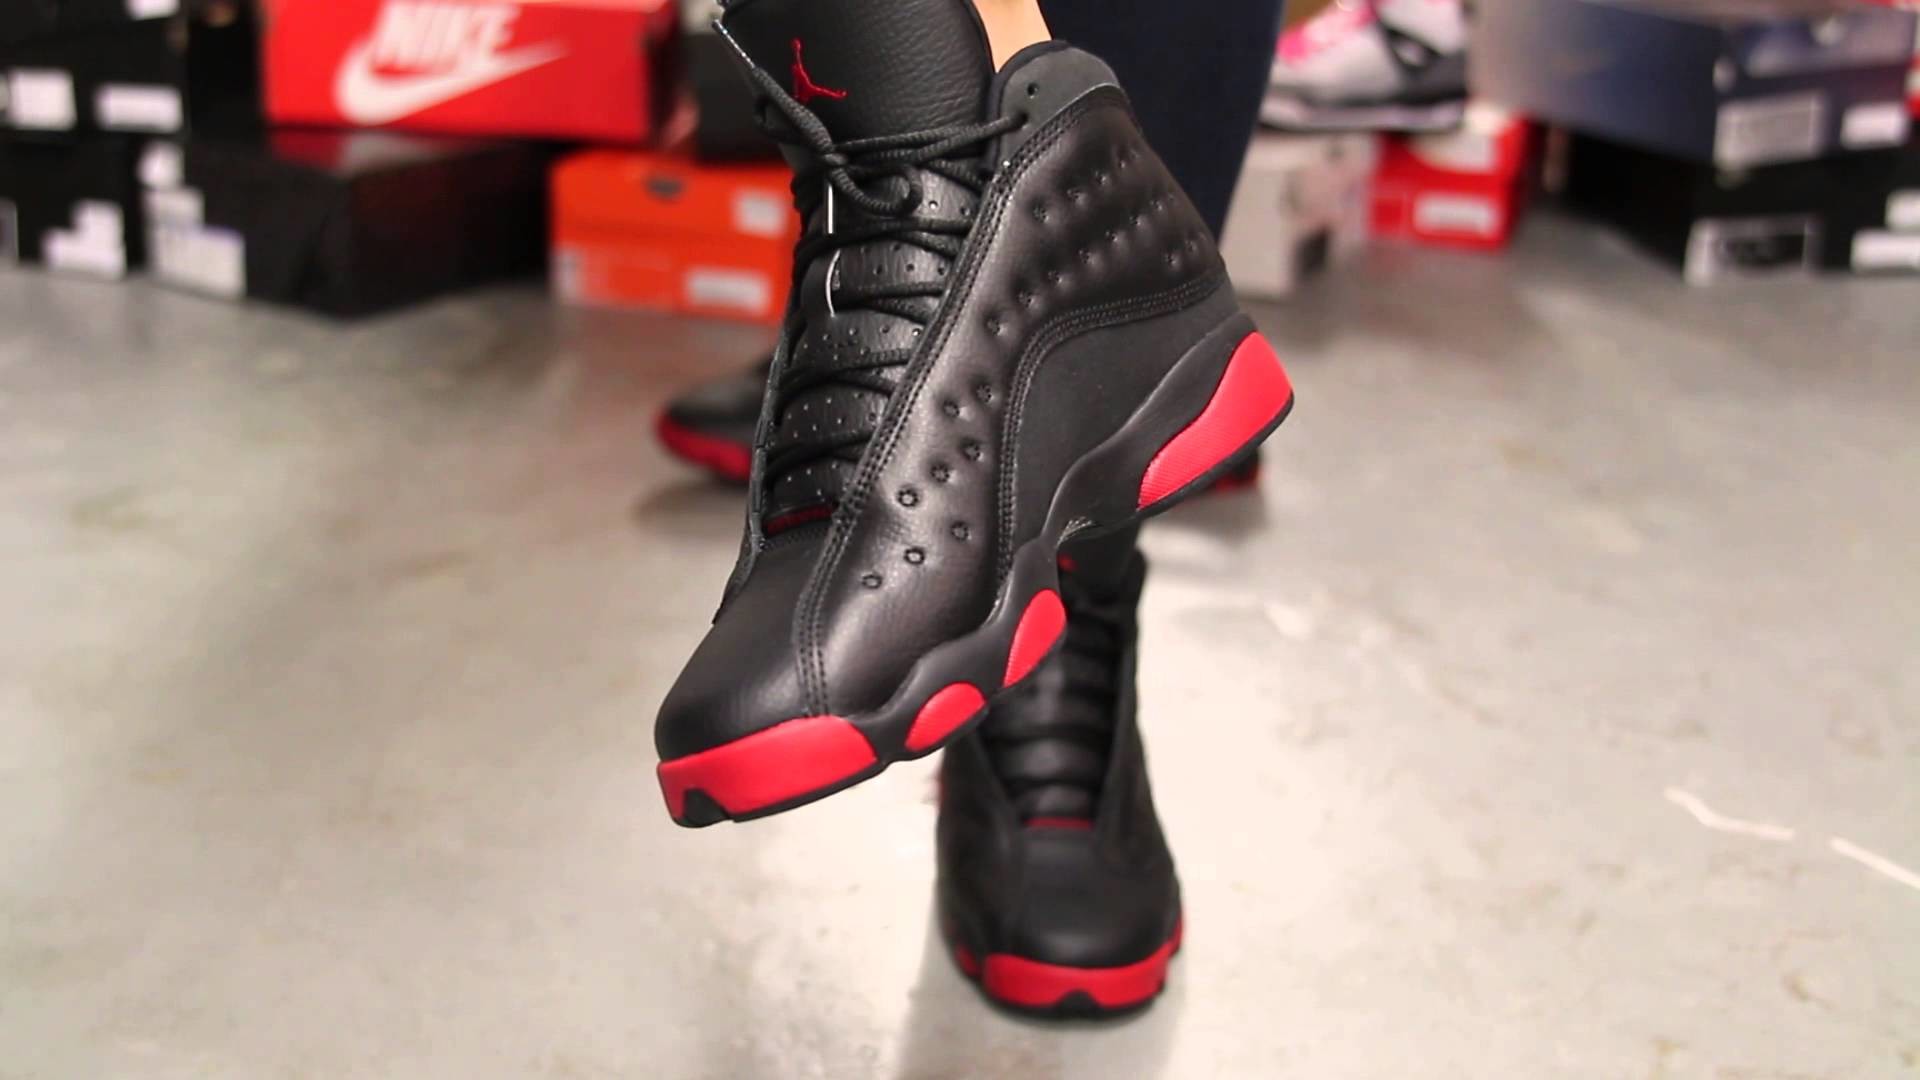 1920x1080 Ladies Air Jordan 13 Retro "Gym Red" On-feet Video at Exclucity - YouTube